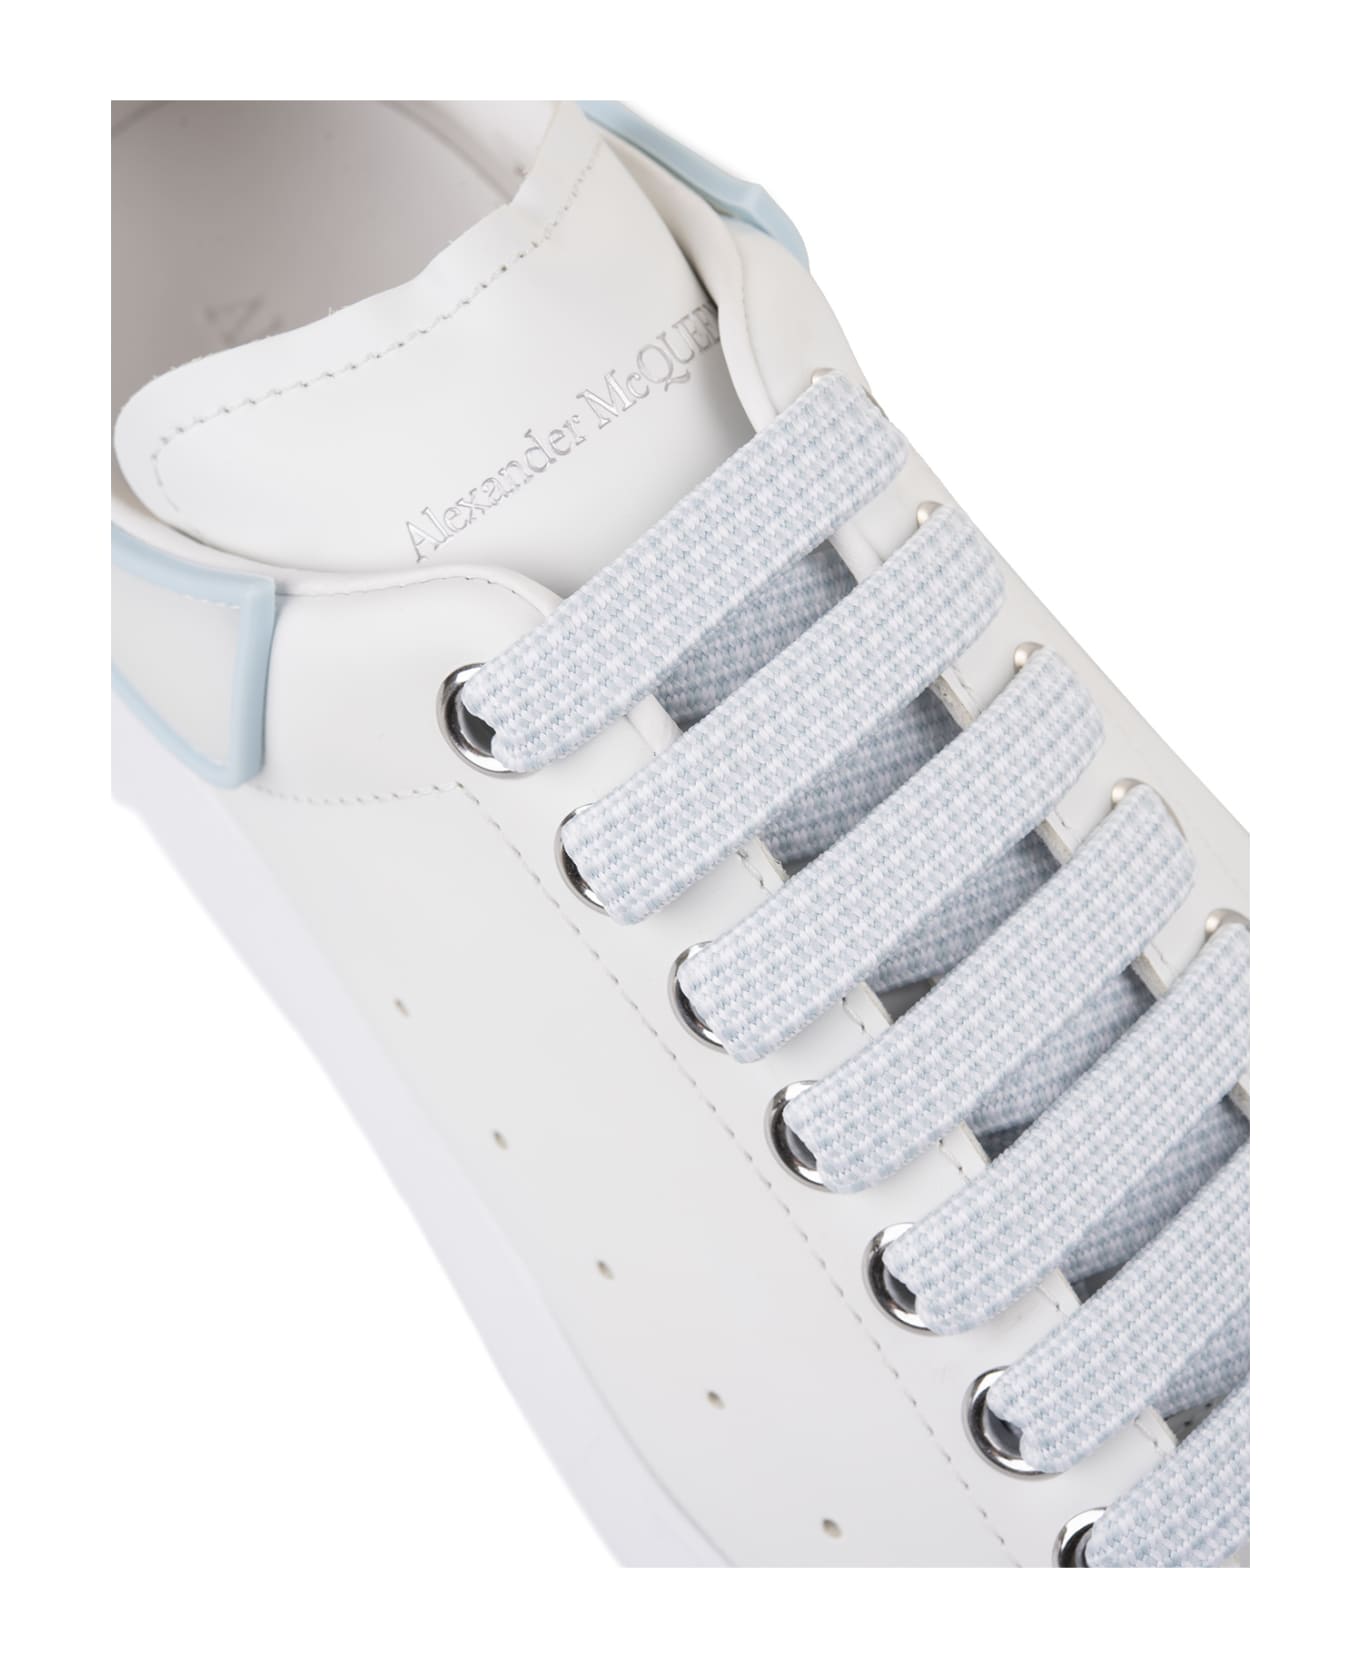 Alexander McQueen White Oversized Sneakers With Powder Blue Details - White スニーカー